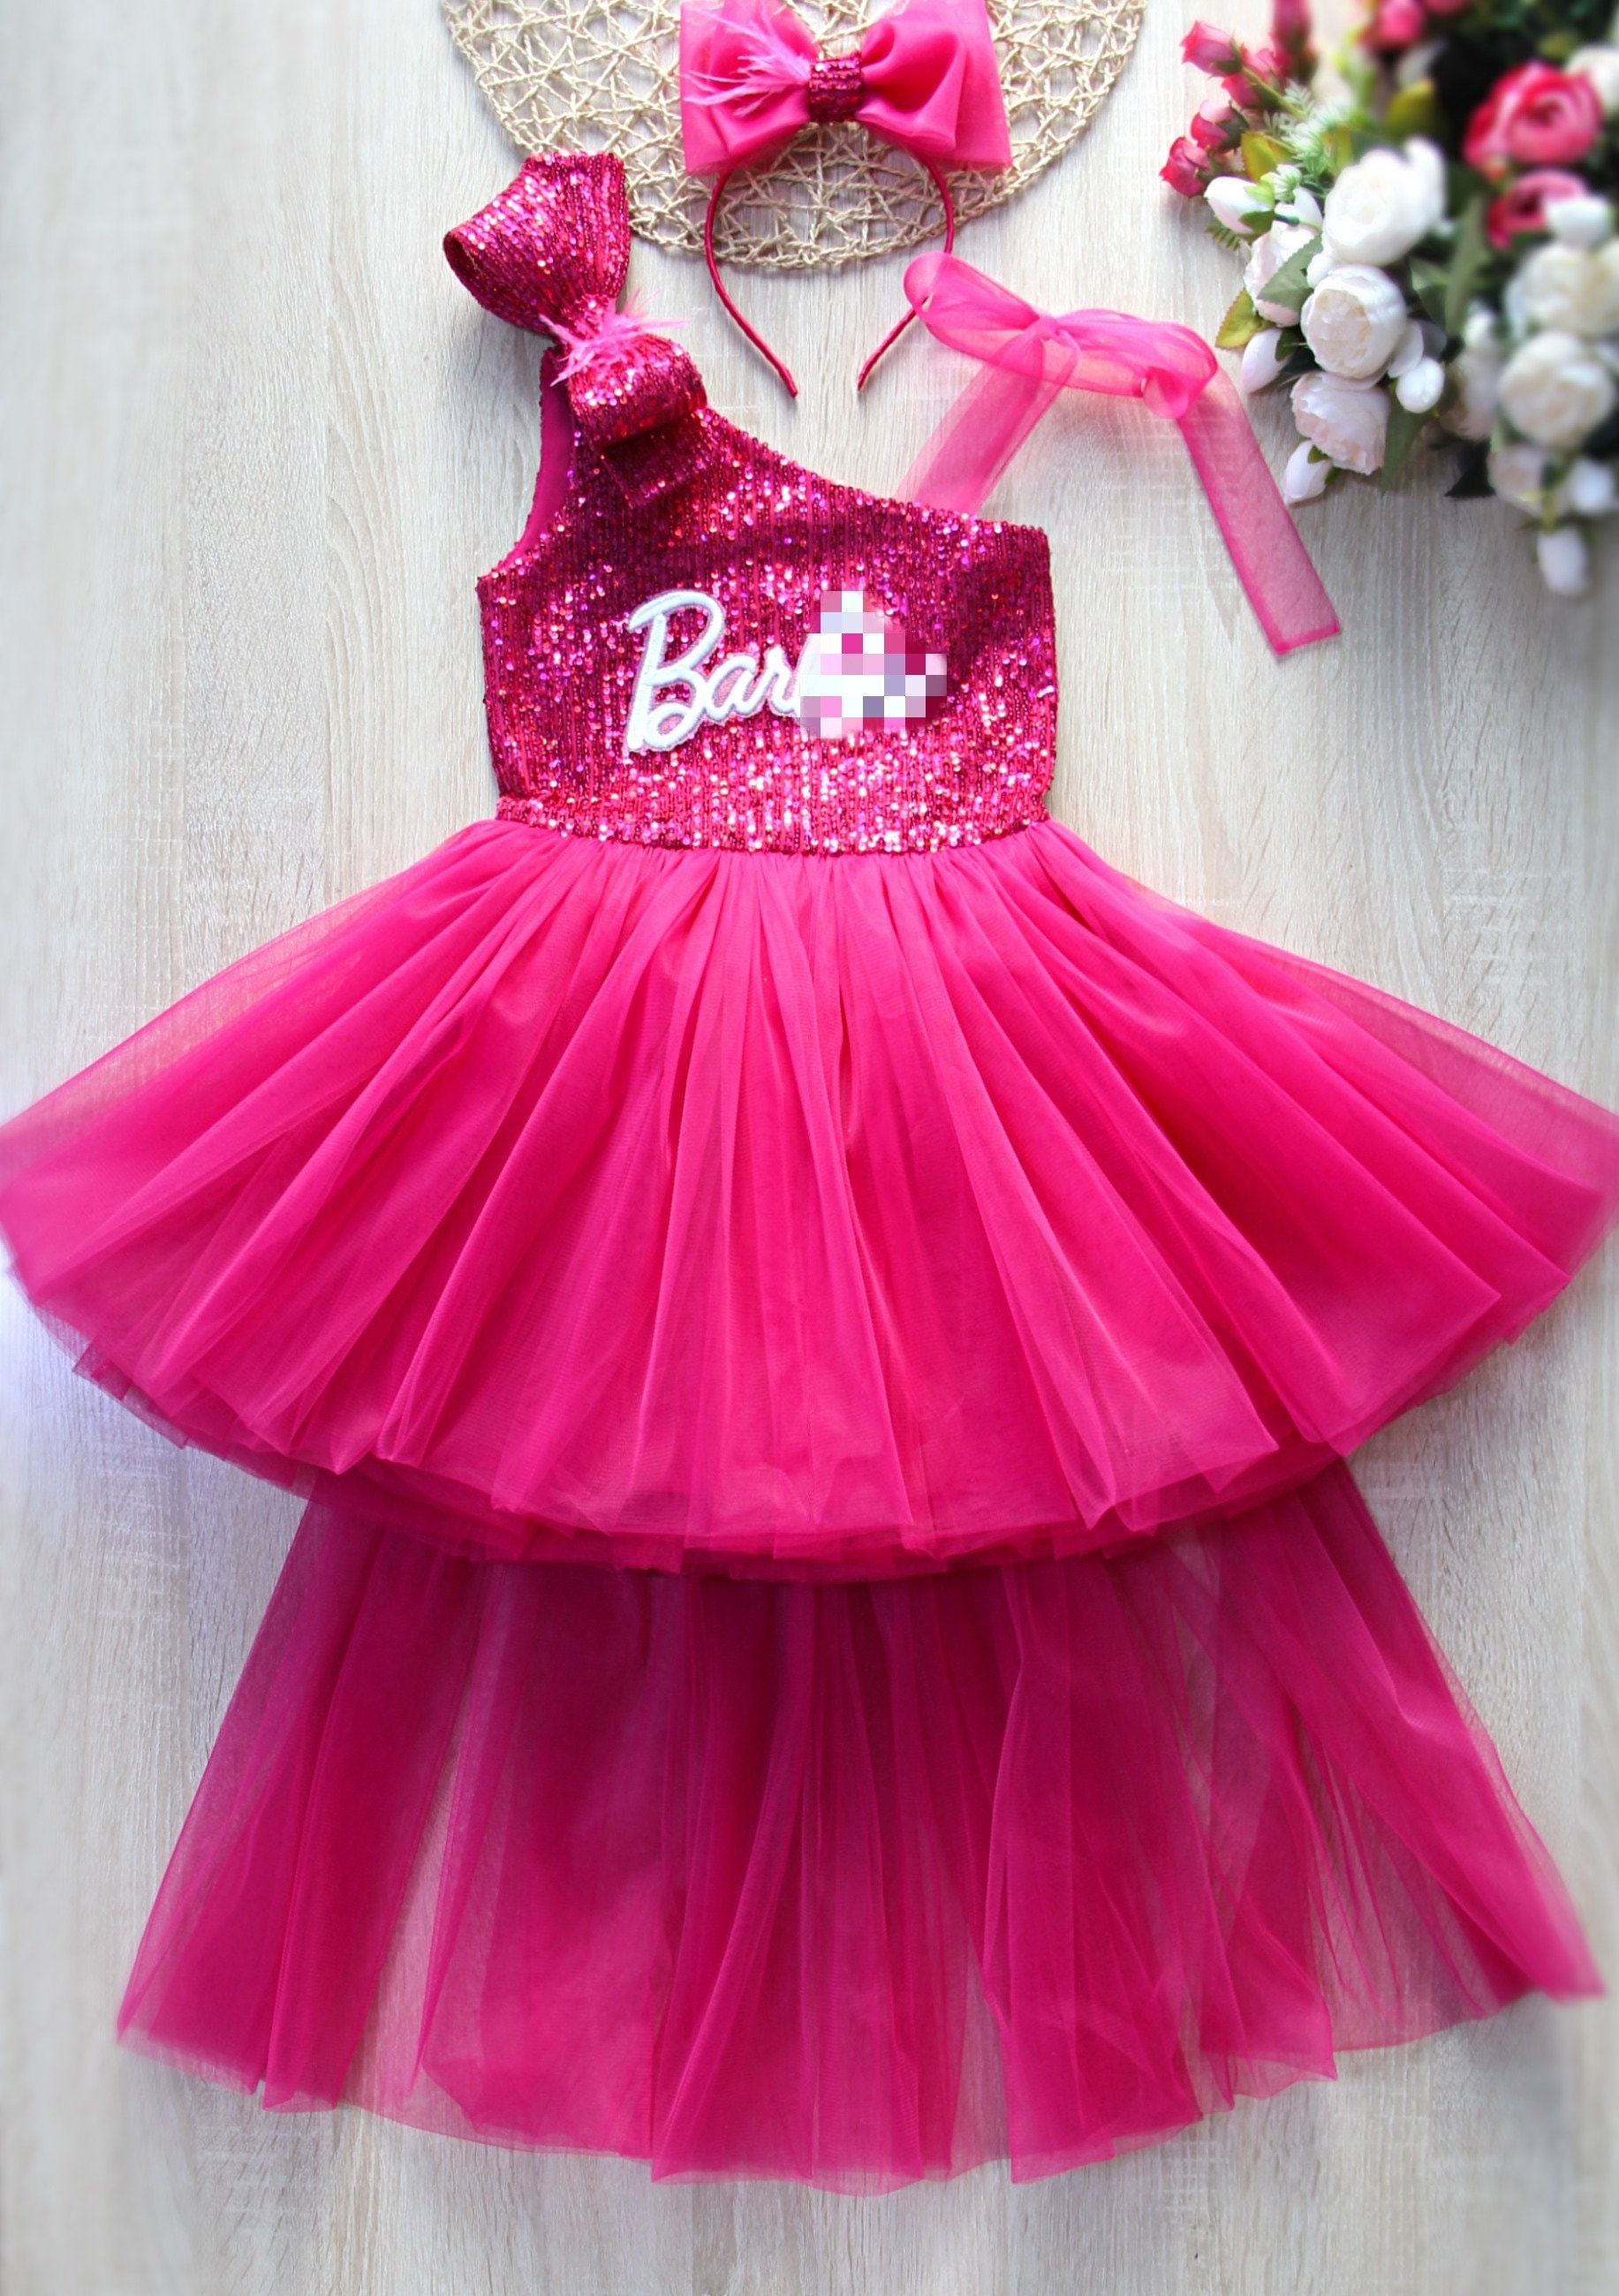 Floral Applique Evening Gown Barbie Pageant Dress For Girls With Ruffles,  Tiered Halter Neck, And Organza Puffy Skirt Perfect For Flower Girls And  Kids Parties From Xzy1984316, $157.41 | DHgate.Com